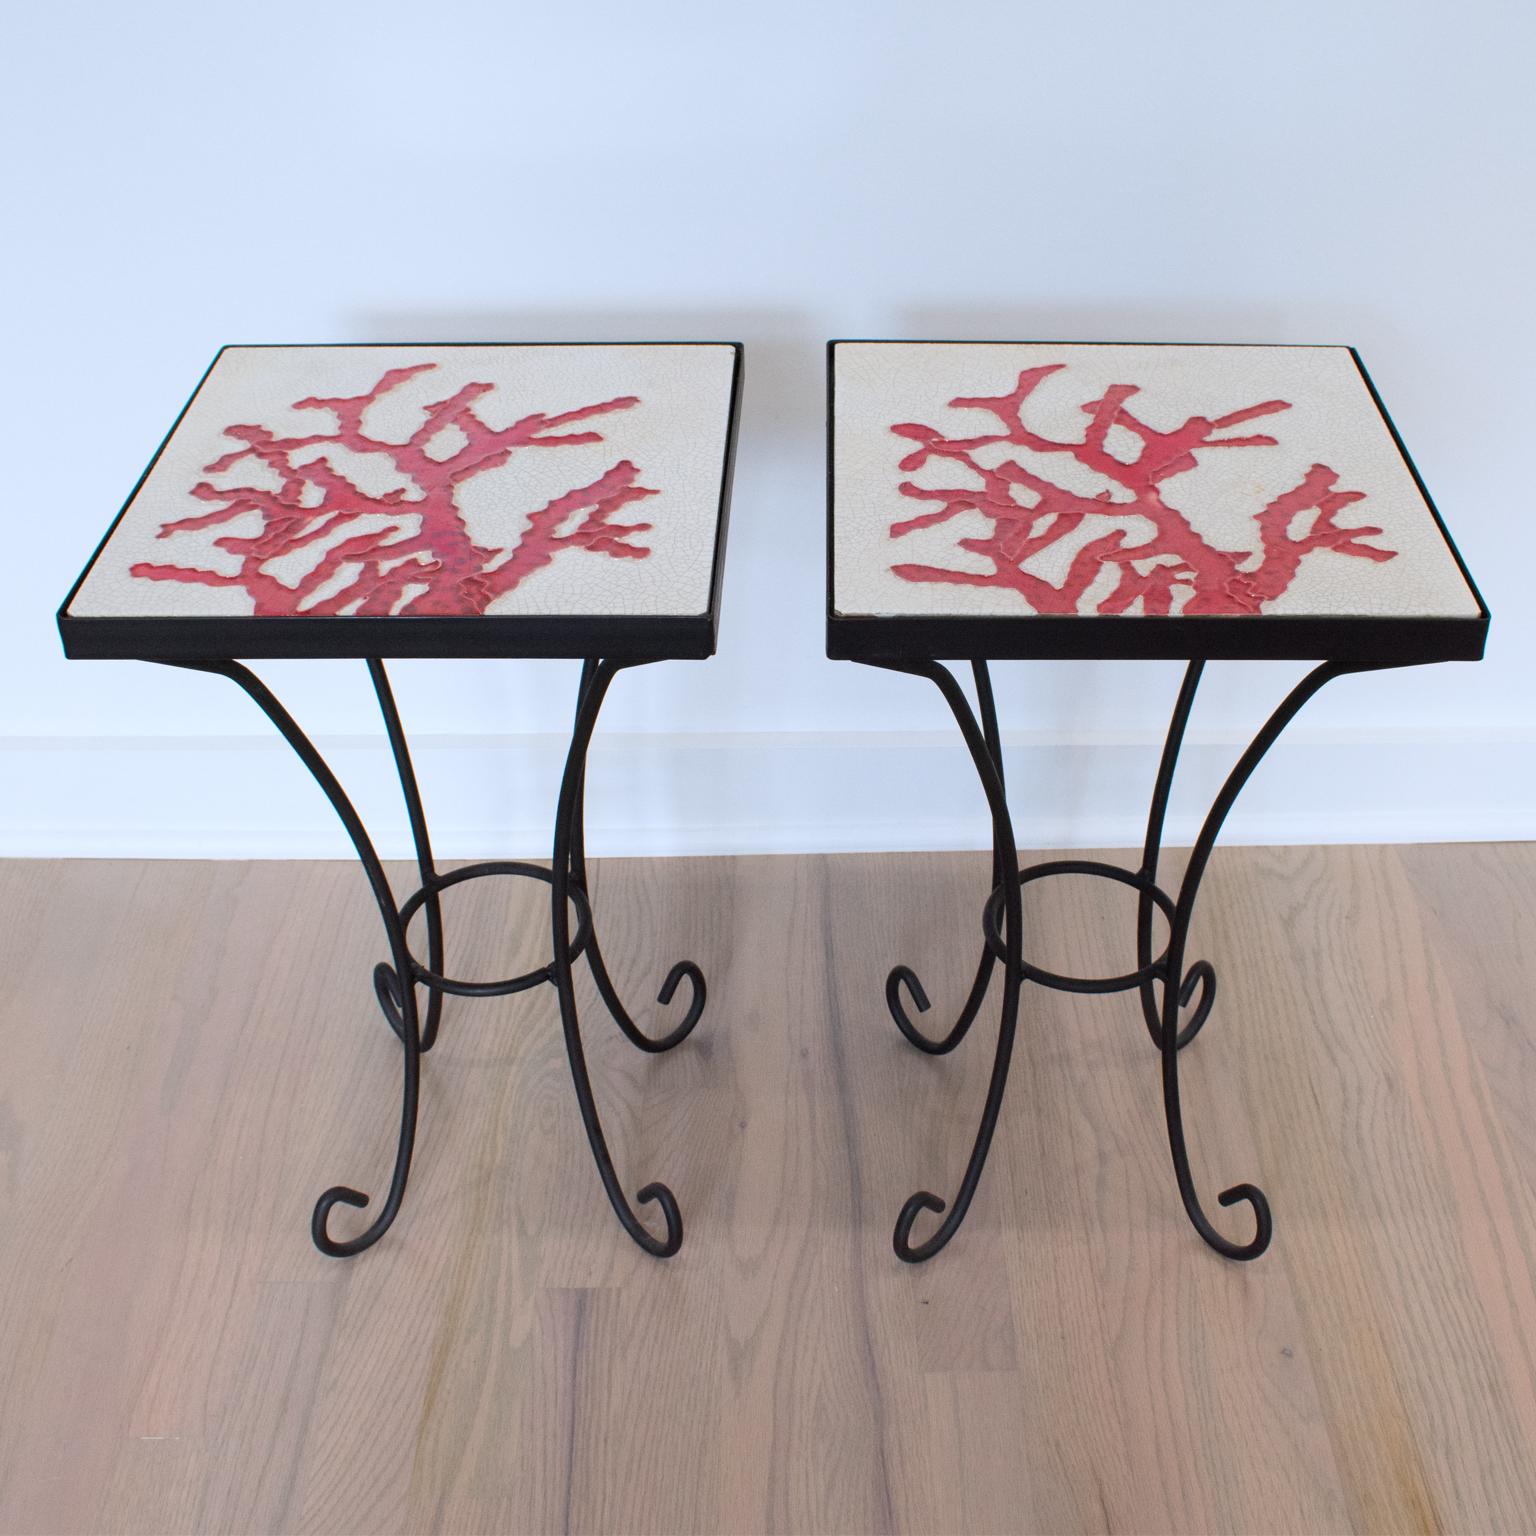 French Wrought Iron and Ceramic Tile Side Coffee Table, a pair, 1950s For Sale